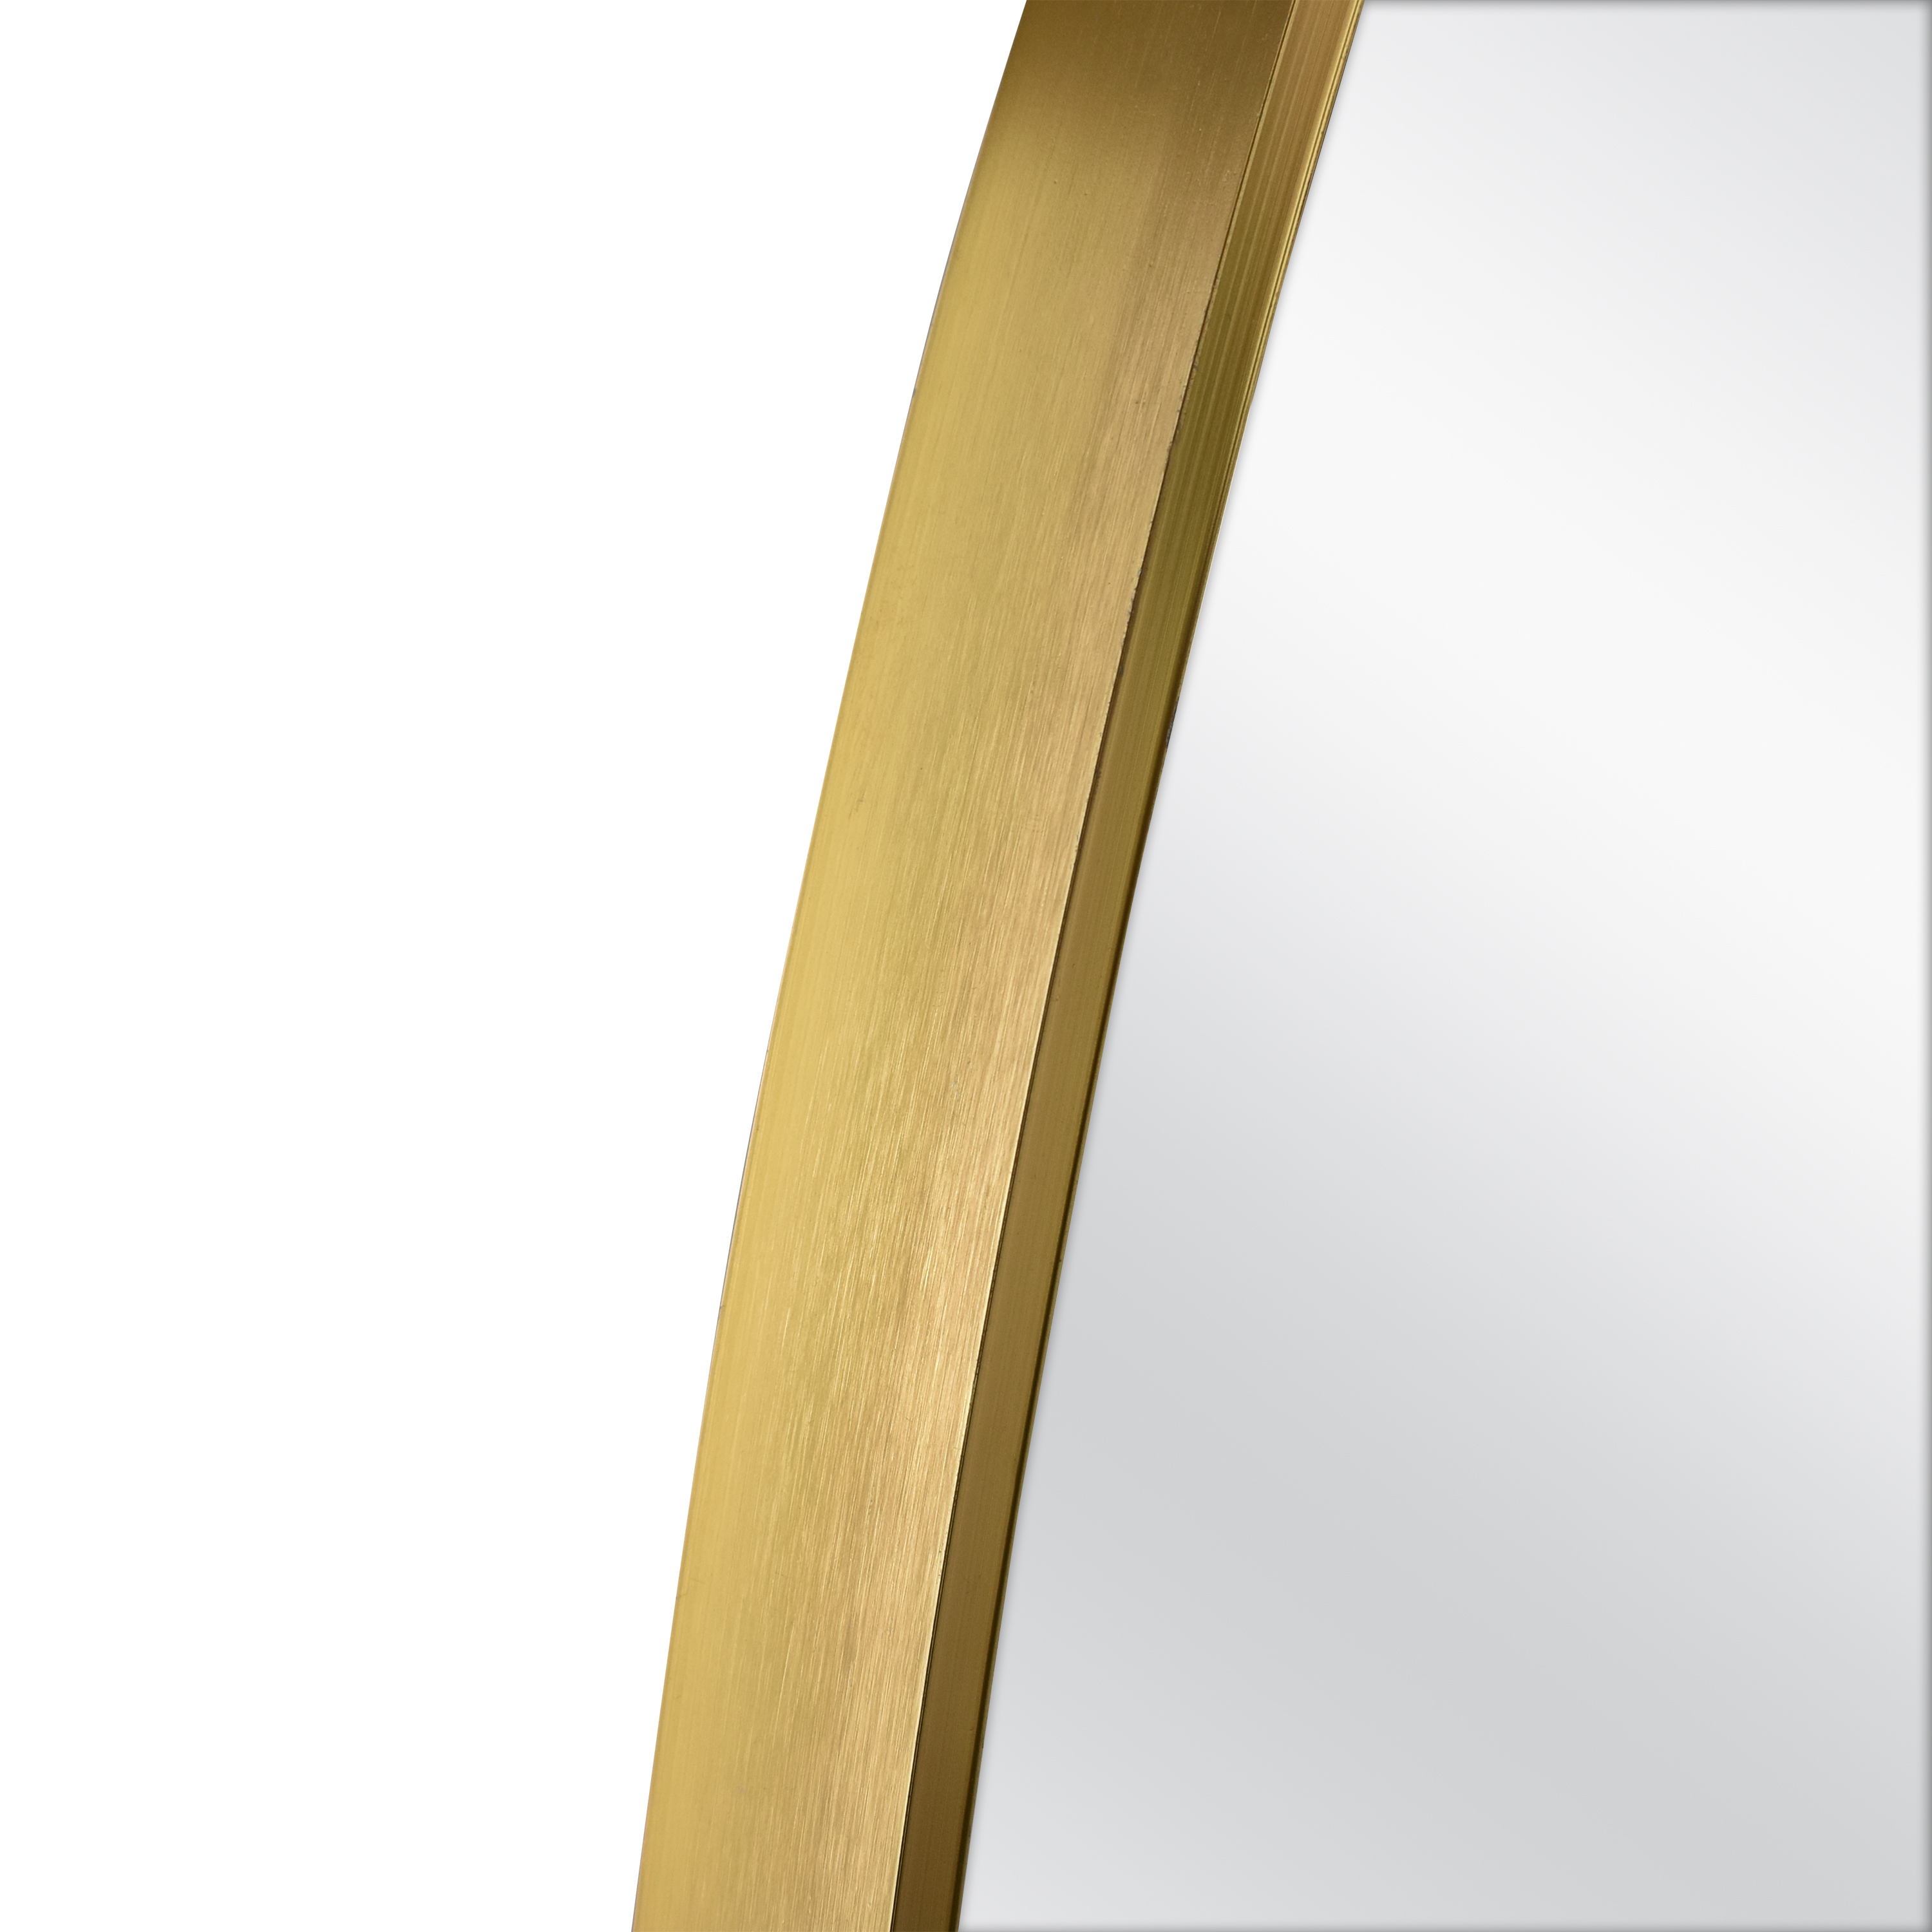 Oval Metal Wall Mirror by Drew Barrymore Flower Home - image 4 of 6